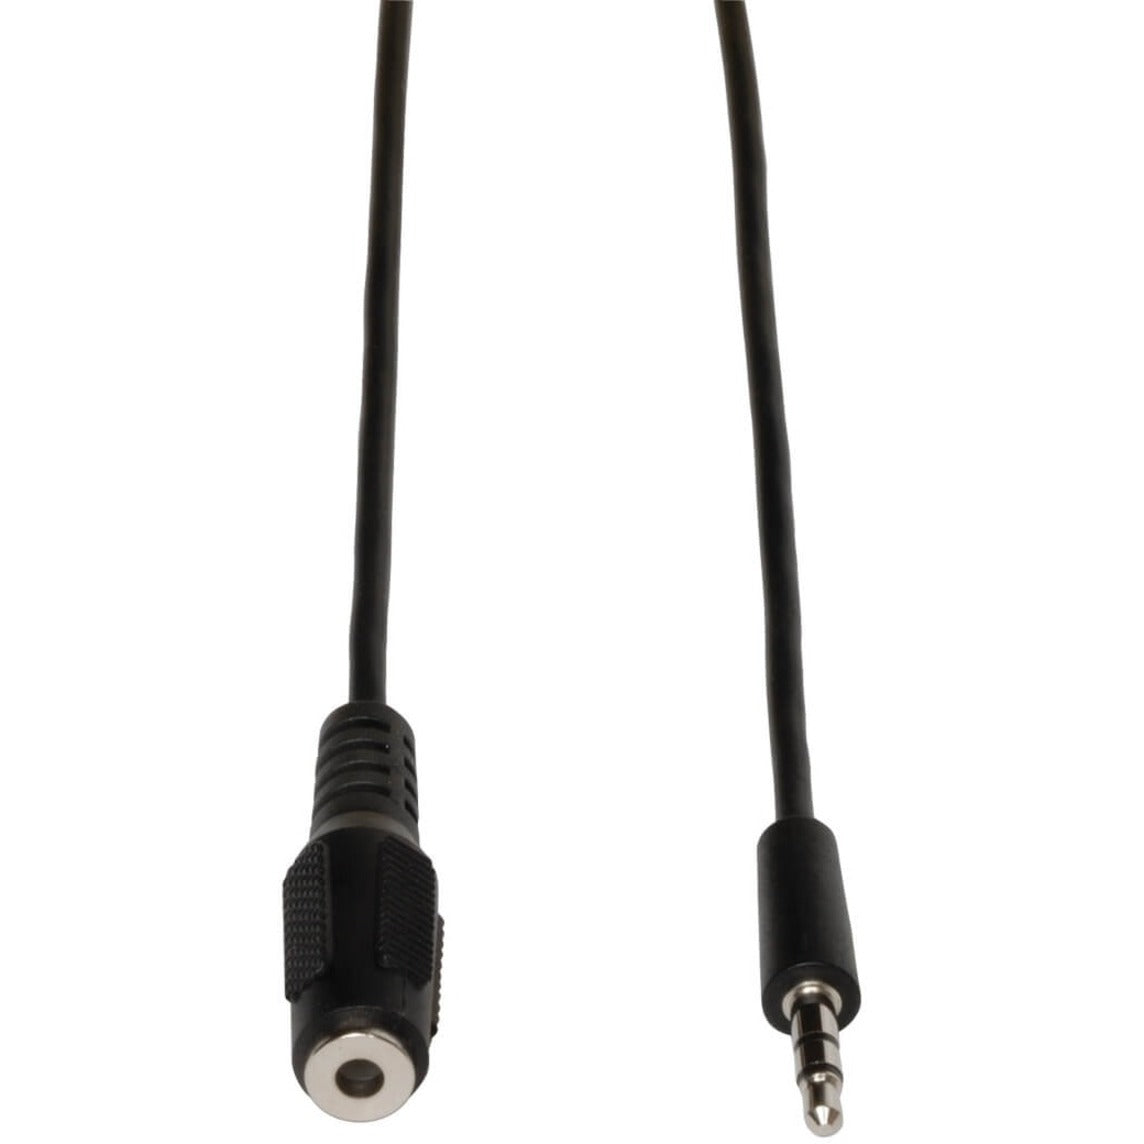 Tripp Lite P311-010 10ft 3.5mm M/F Mini-Stereo Audio Extension Cable, Molded, Copper Conductor, Shielded, Nickel Plated Connectors